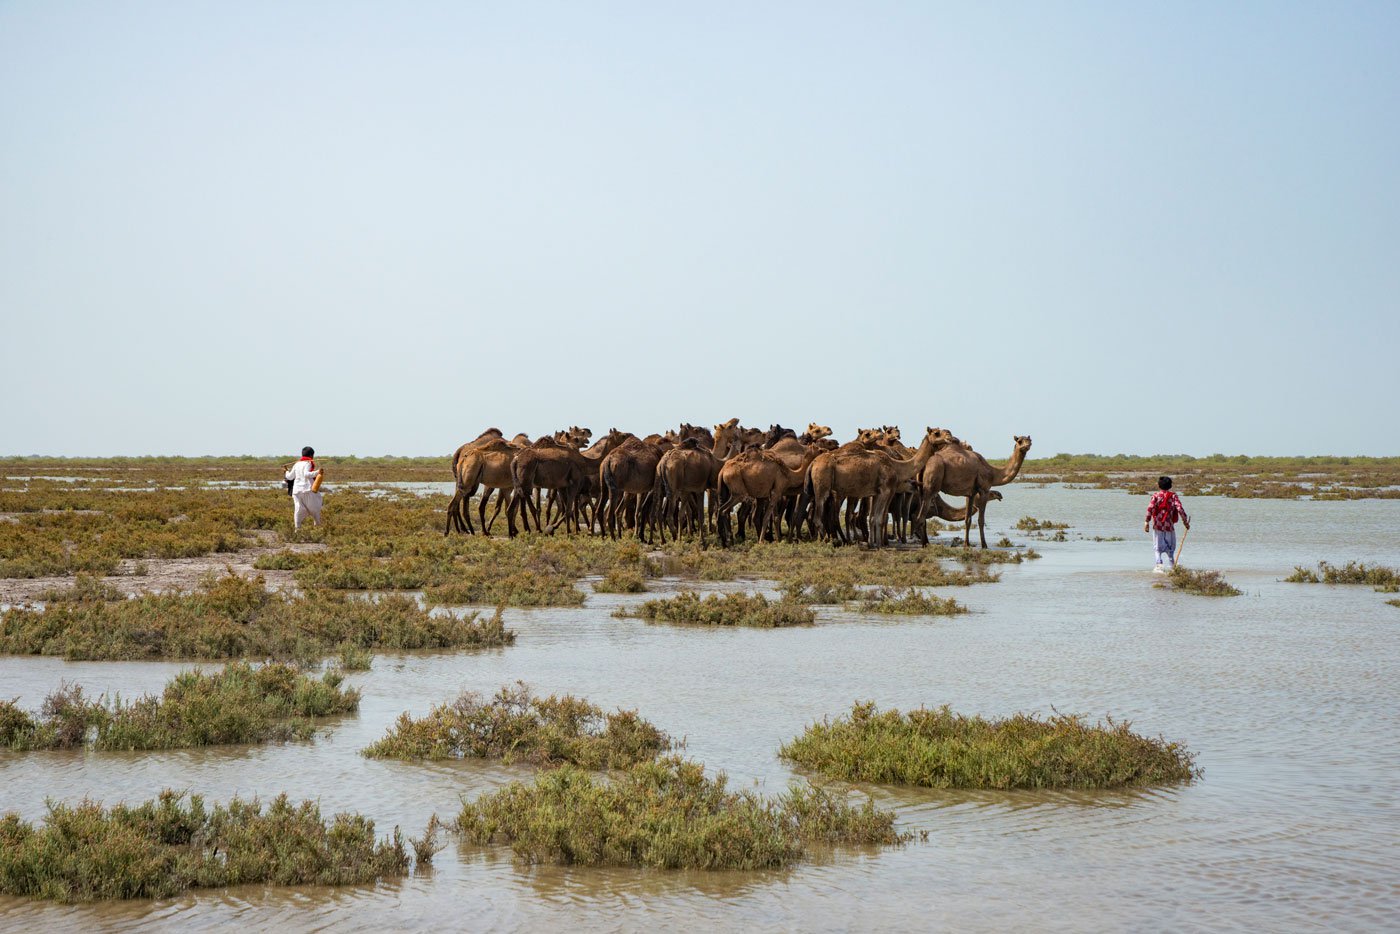 Jethabhai Rabari driving his herd out to graze in the creeks of the Gulf of Kachchh